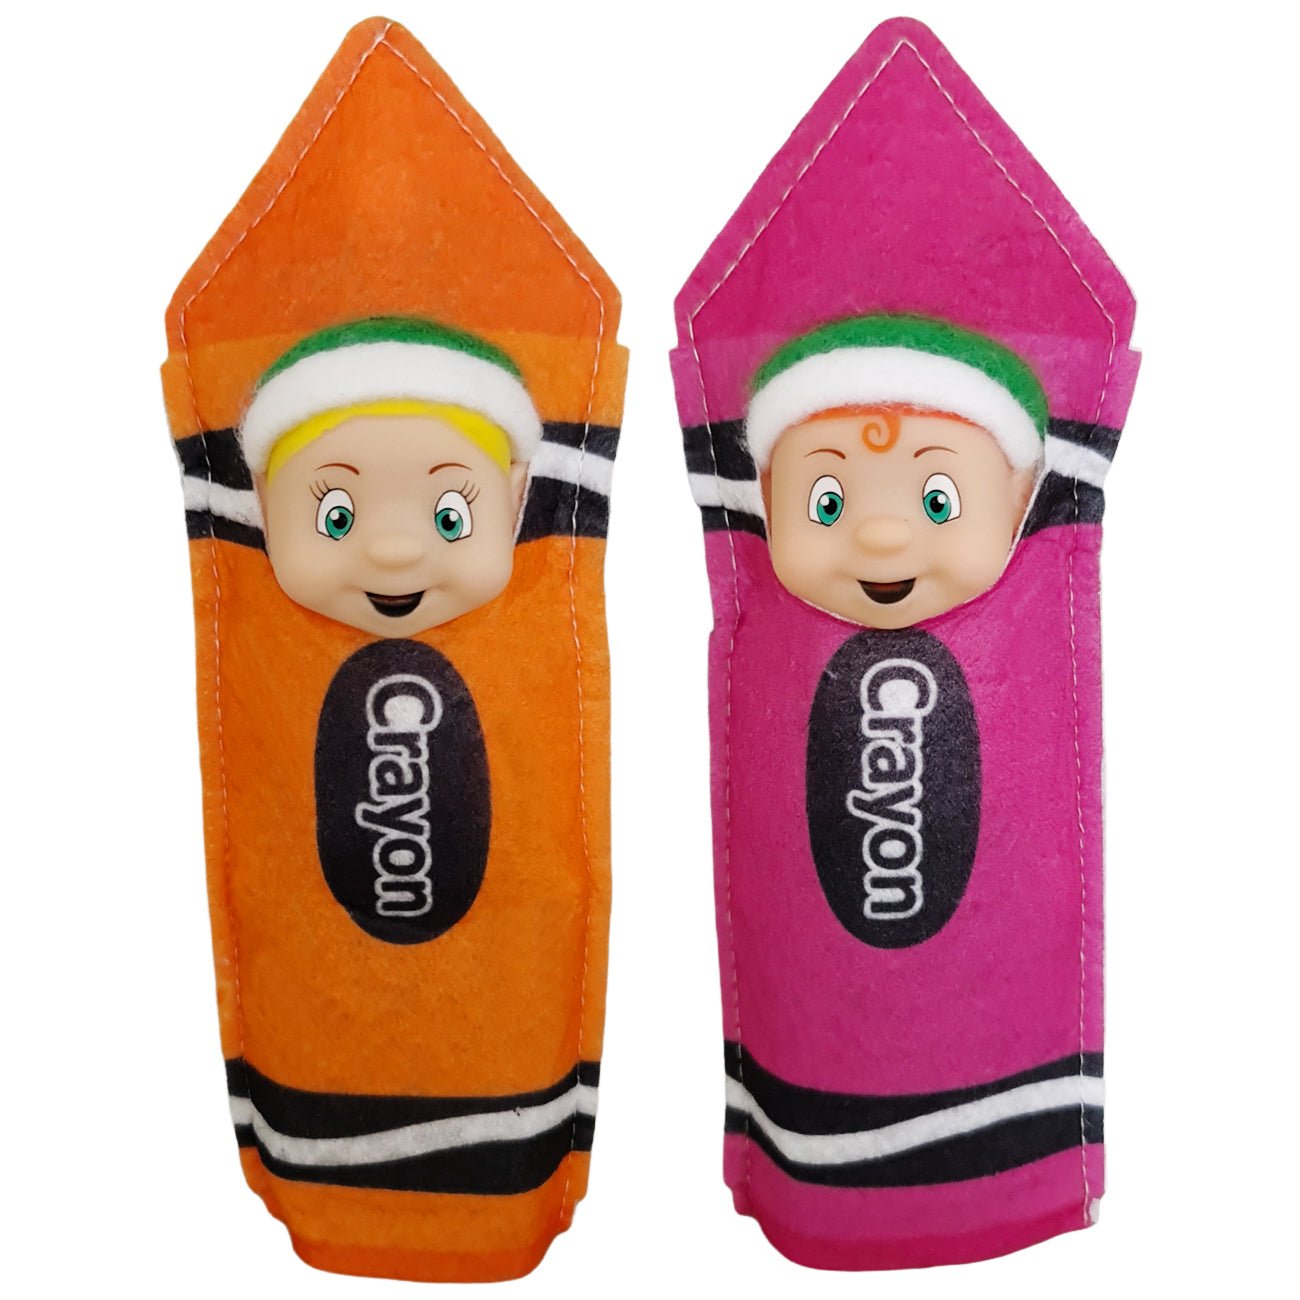 Crayon Elf Toddler Costumes available in orange or purple